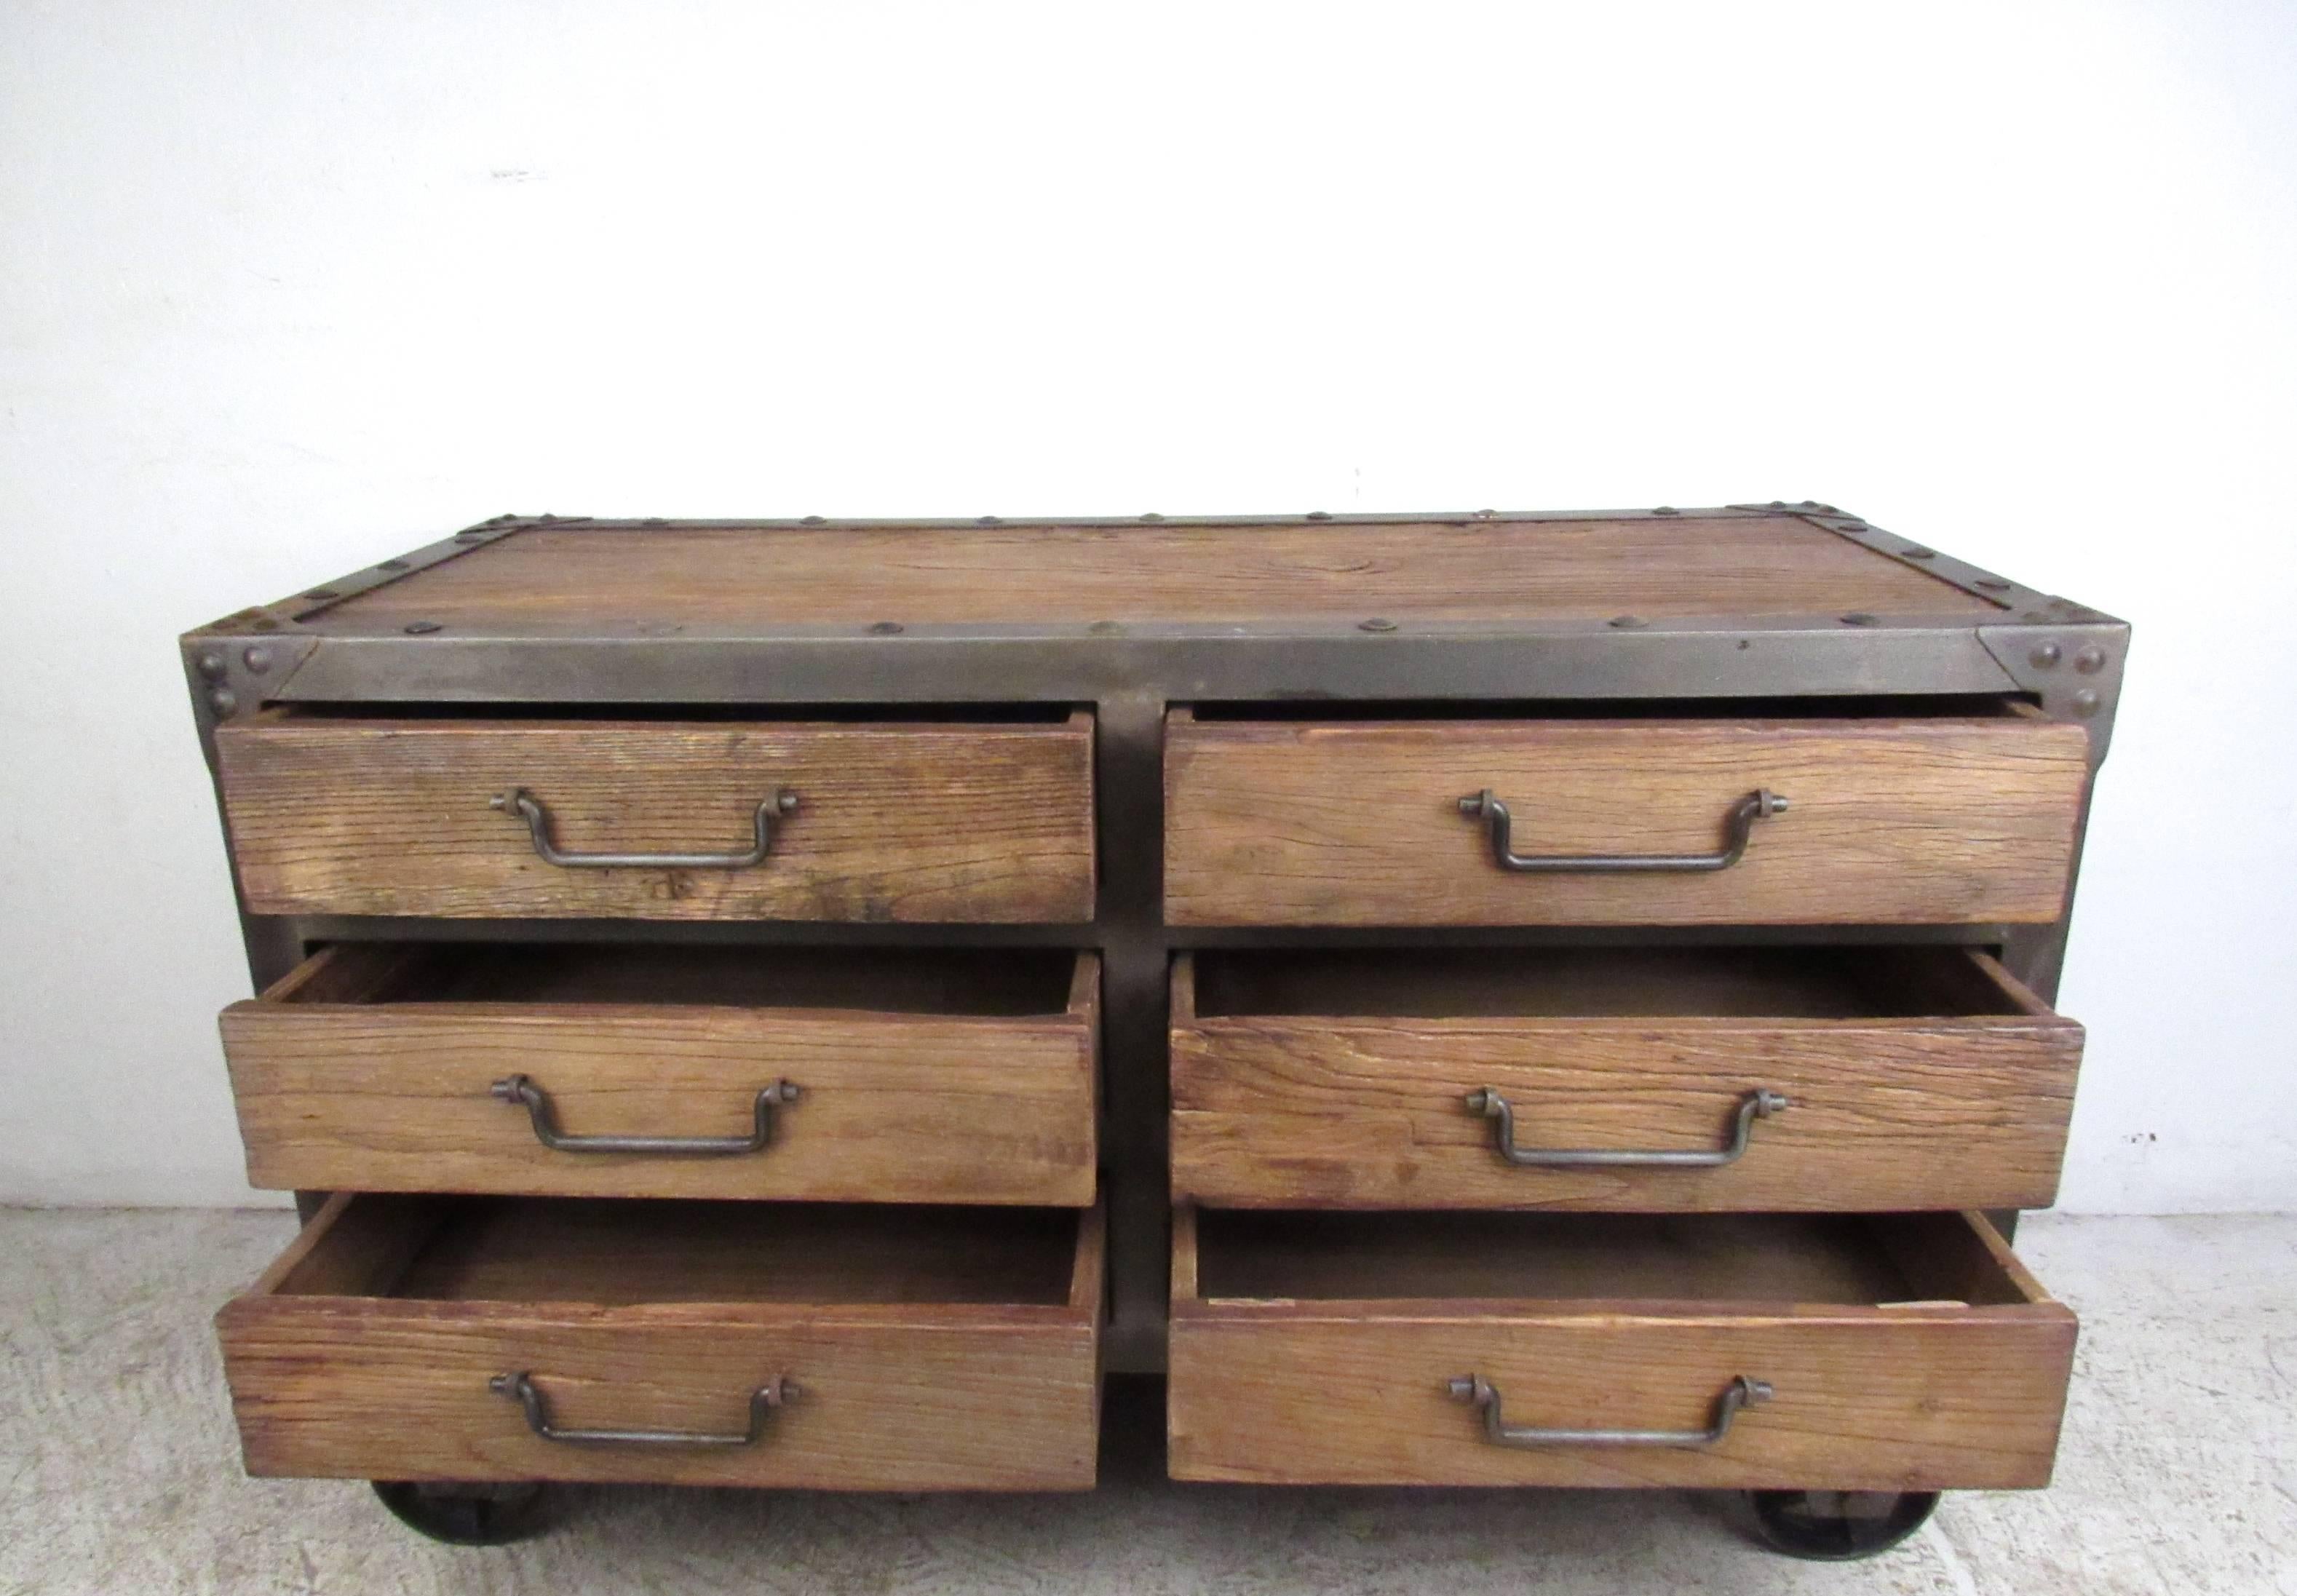 The unique Industrial style of this metal and wood chest of drawers makes a wonderful modern storage option for a variety of interiors. Heavy duty wheels and unique drawer pulls add to the vintage factory feel of the dresser. Please confirm item